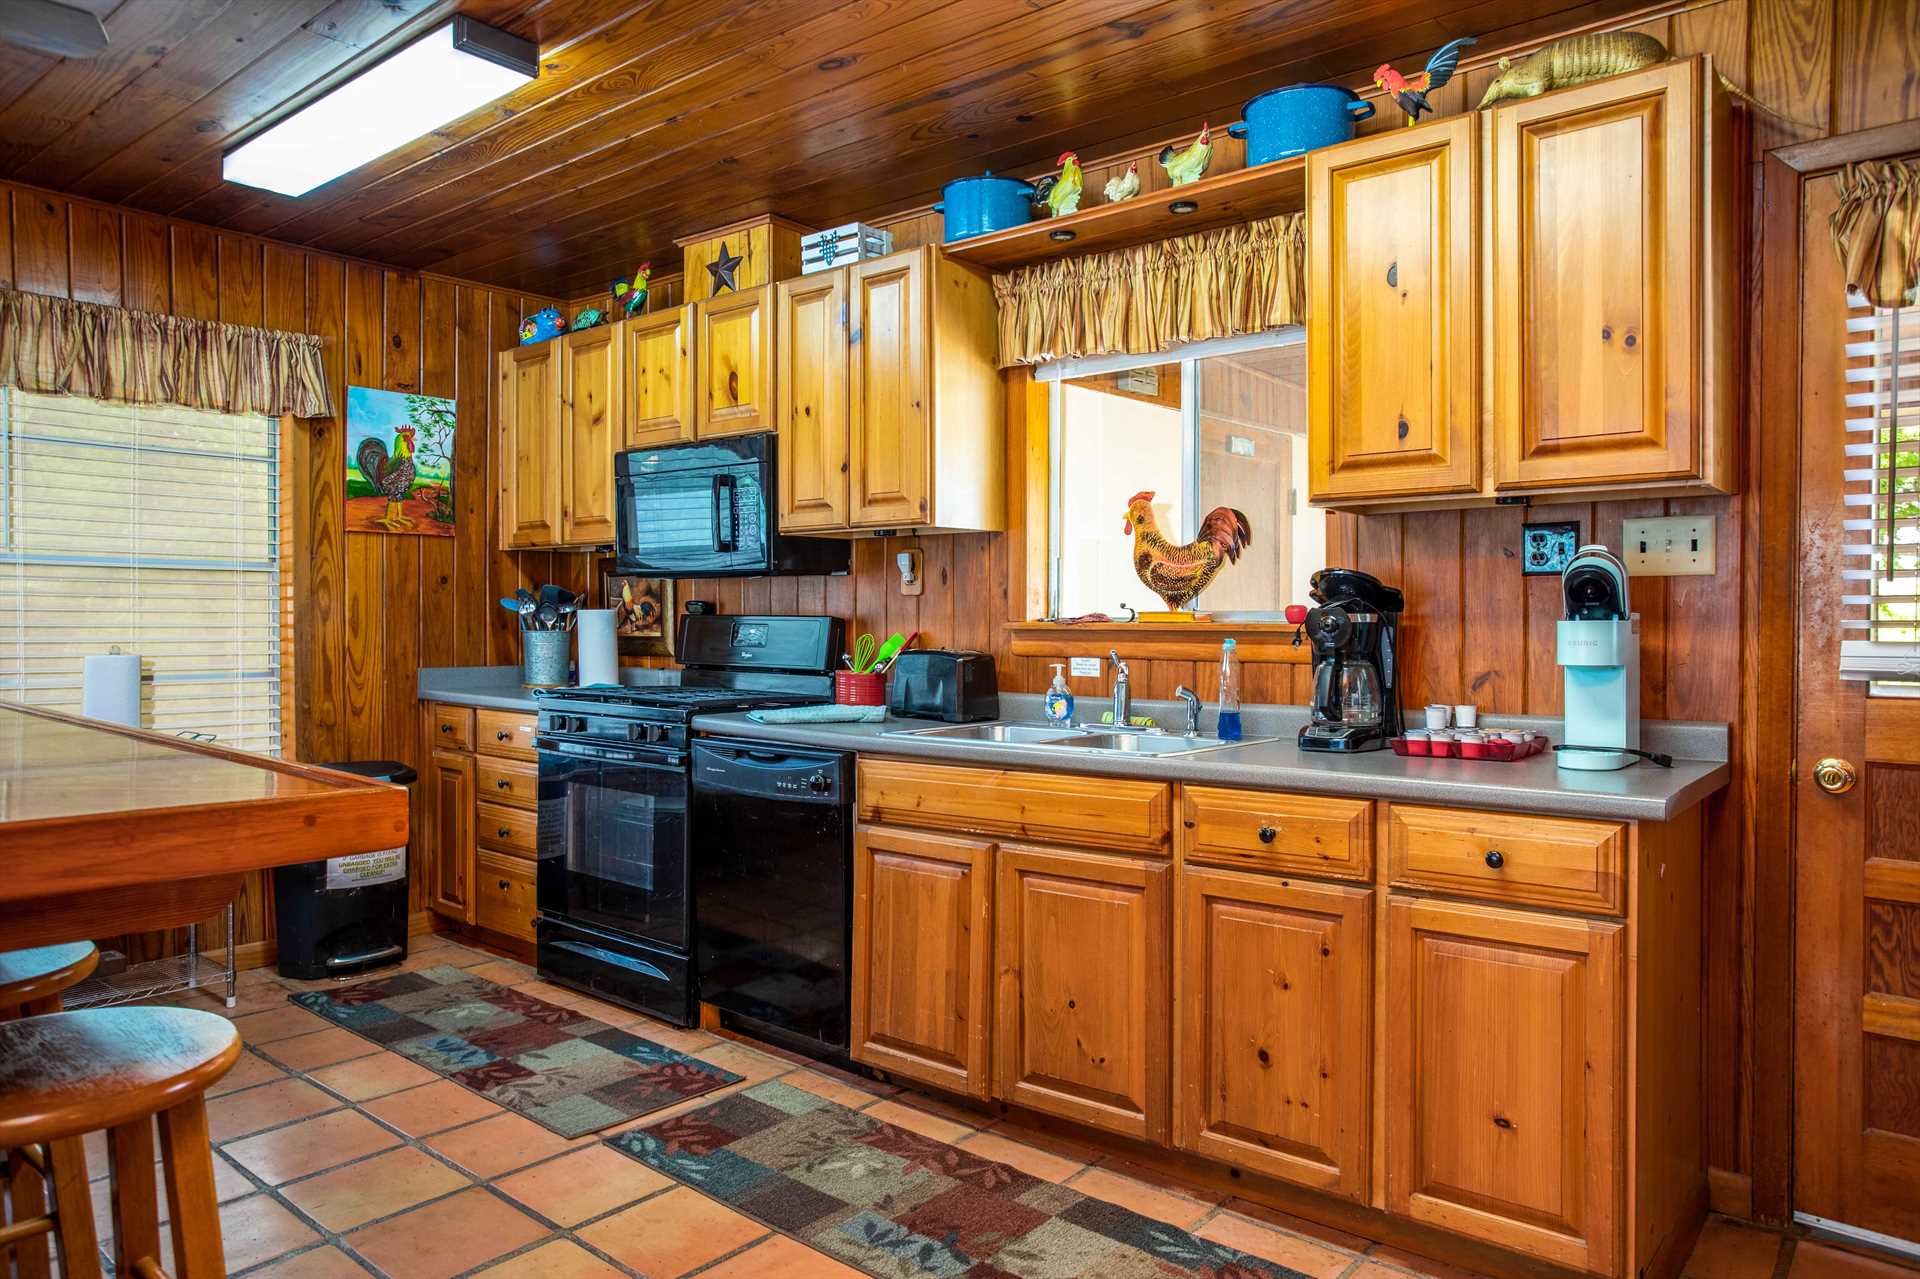                                                 A golden glow surrounds the full country kitchen, equipped with appliances, cooking ware, and serving ware.